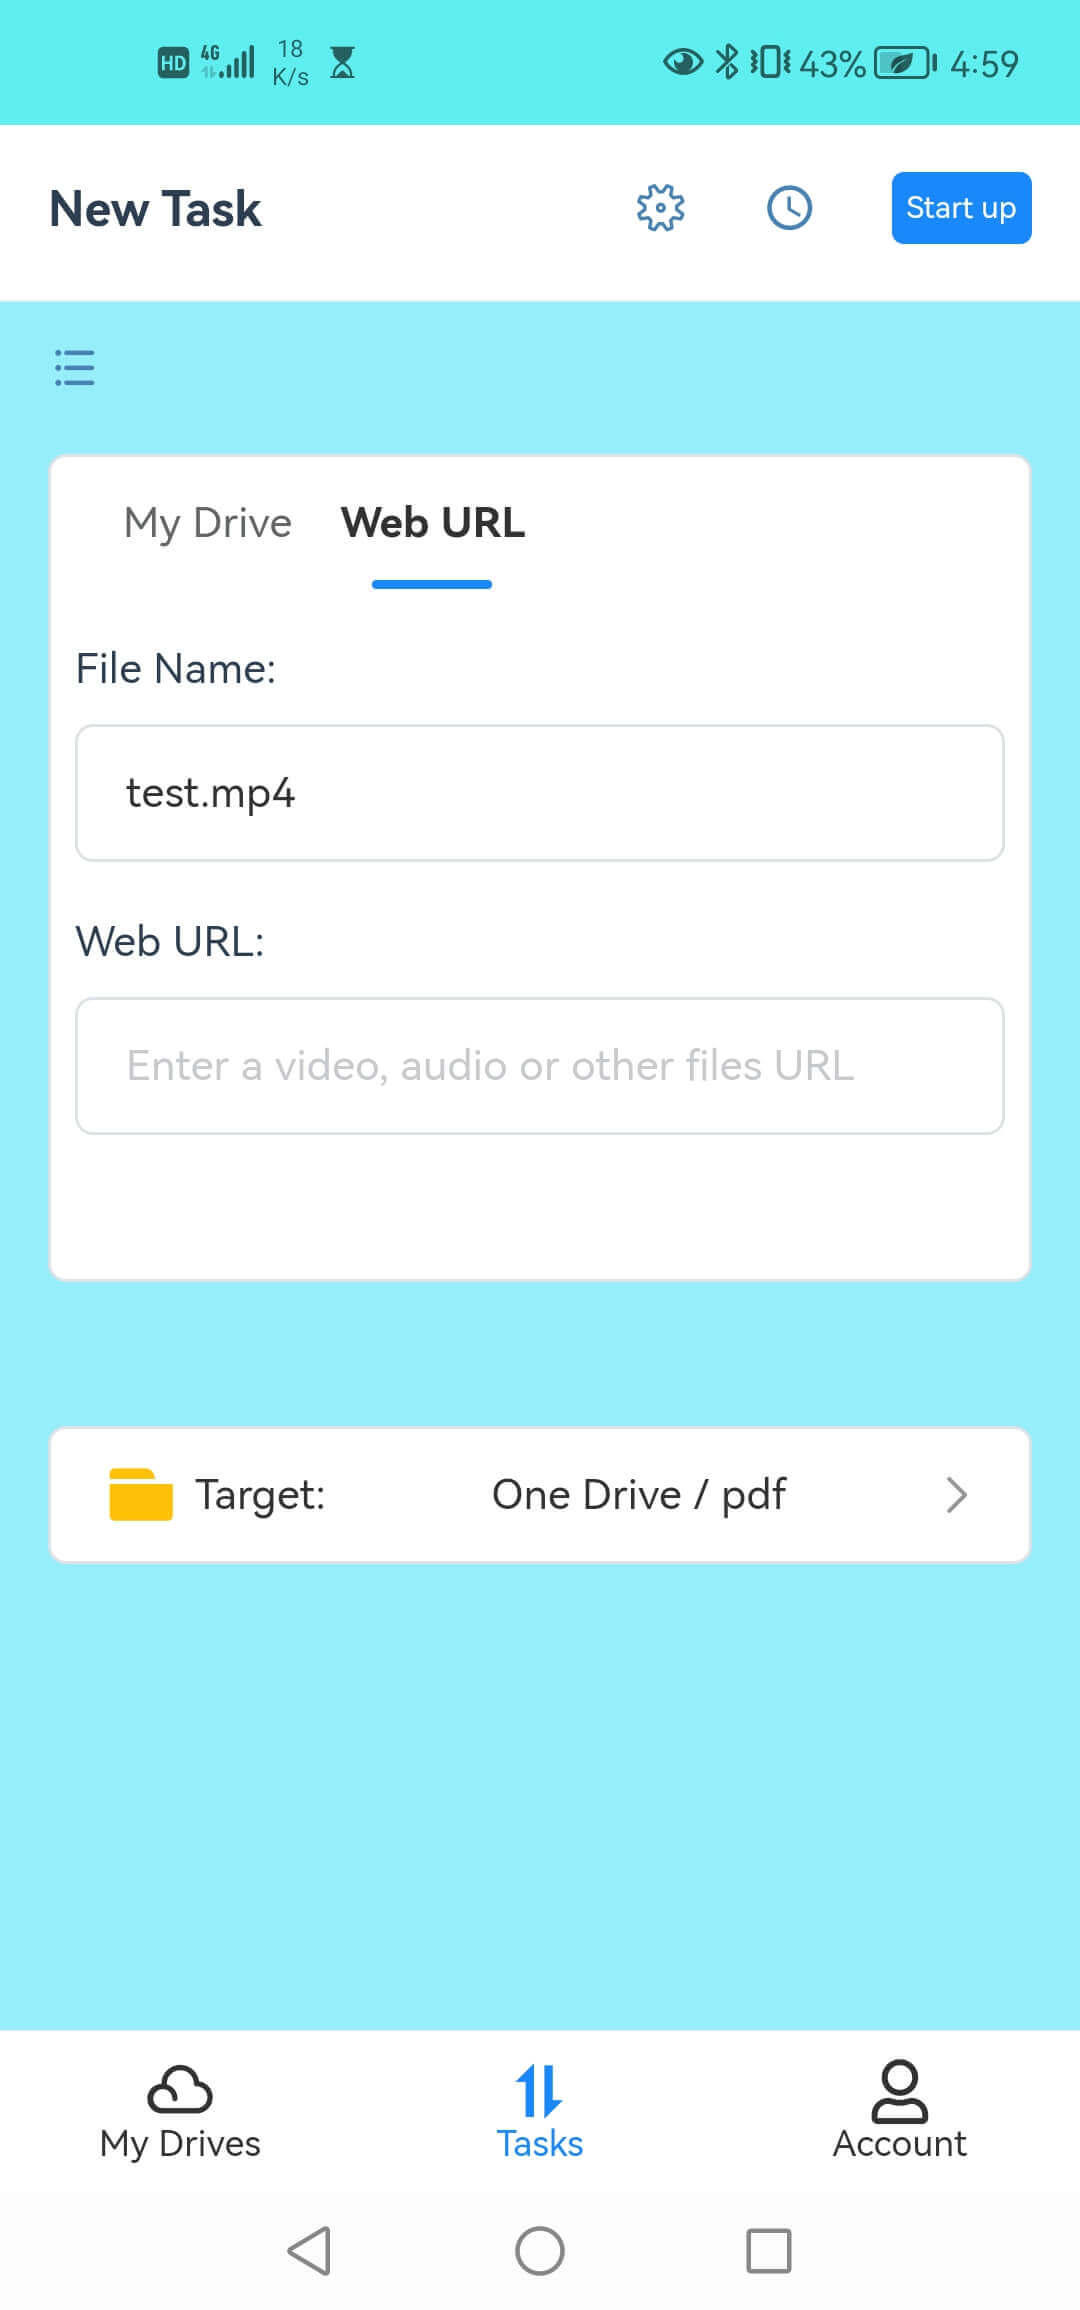 Create task to download video from website